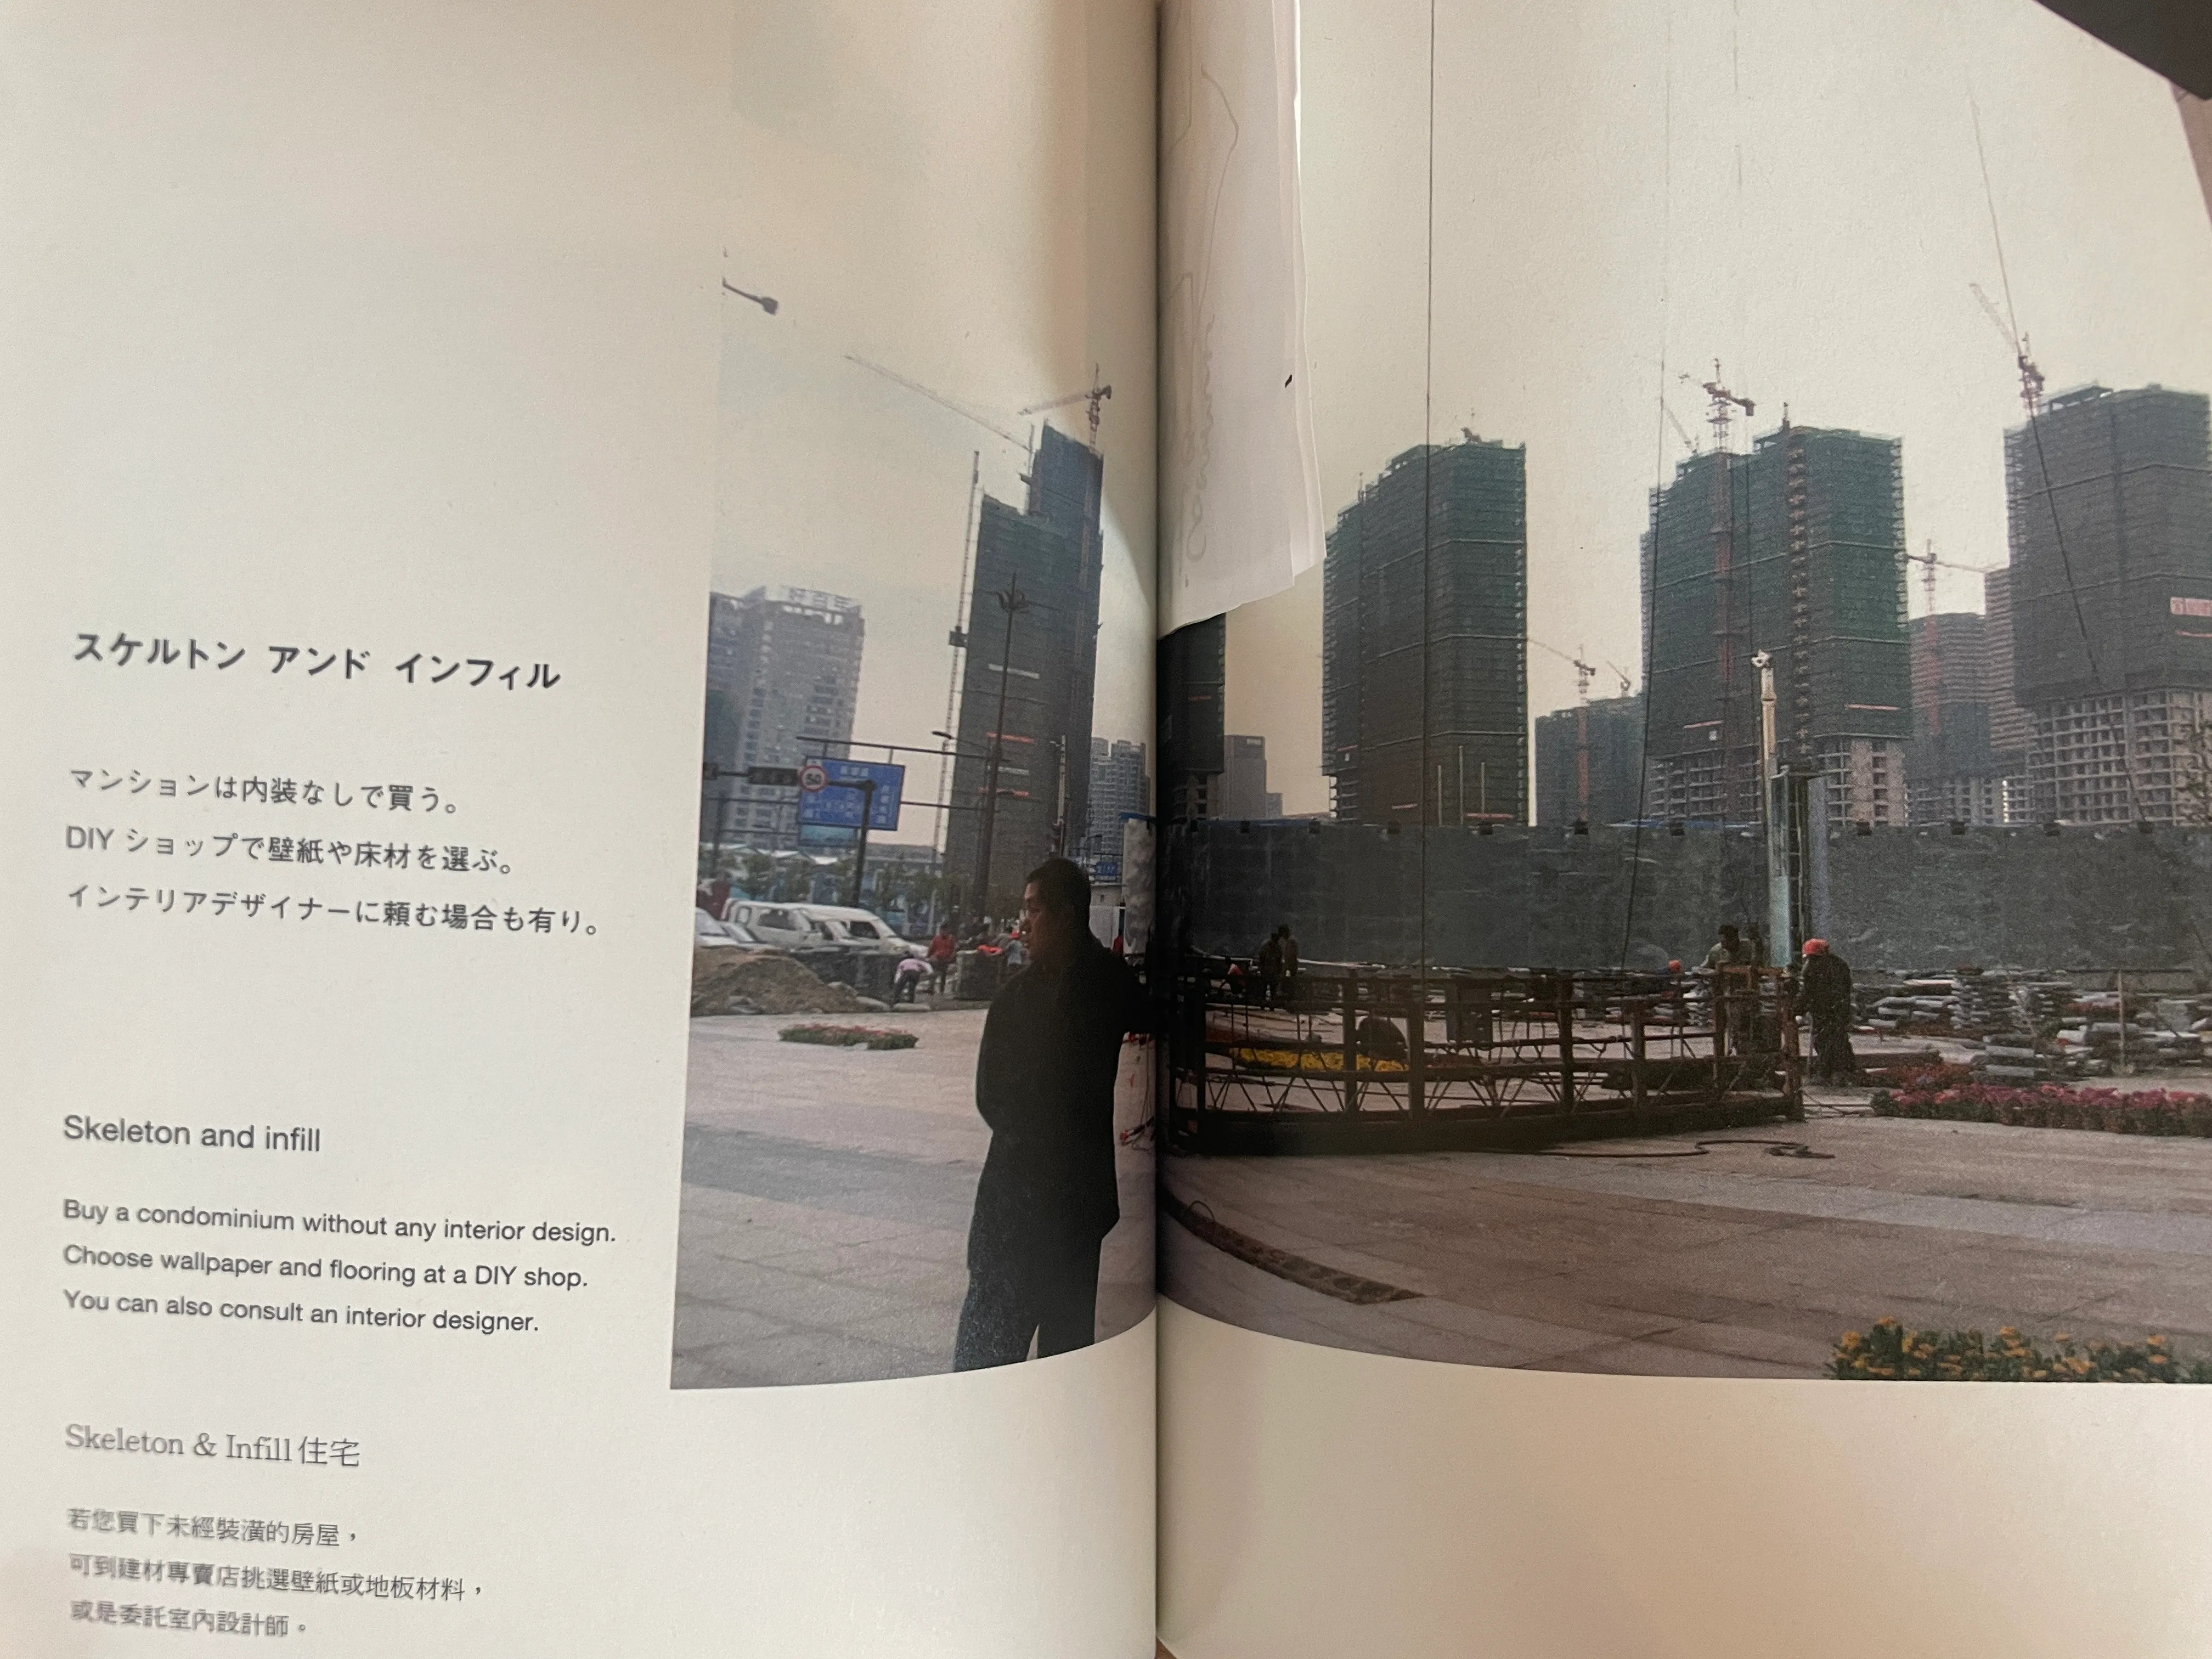 A photograph of favorite moment from Found Muji. Skeleton and infill customization accessibility in new Chinese housing developments.